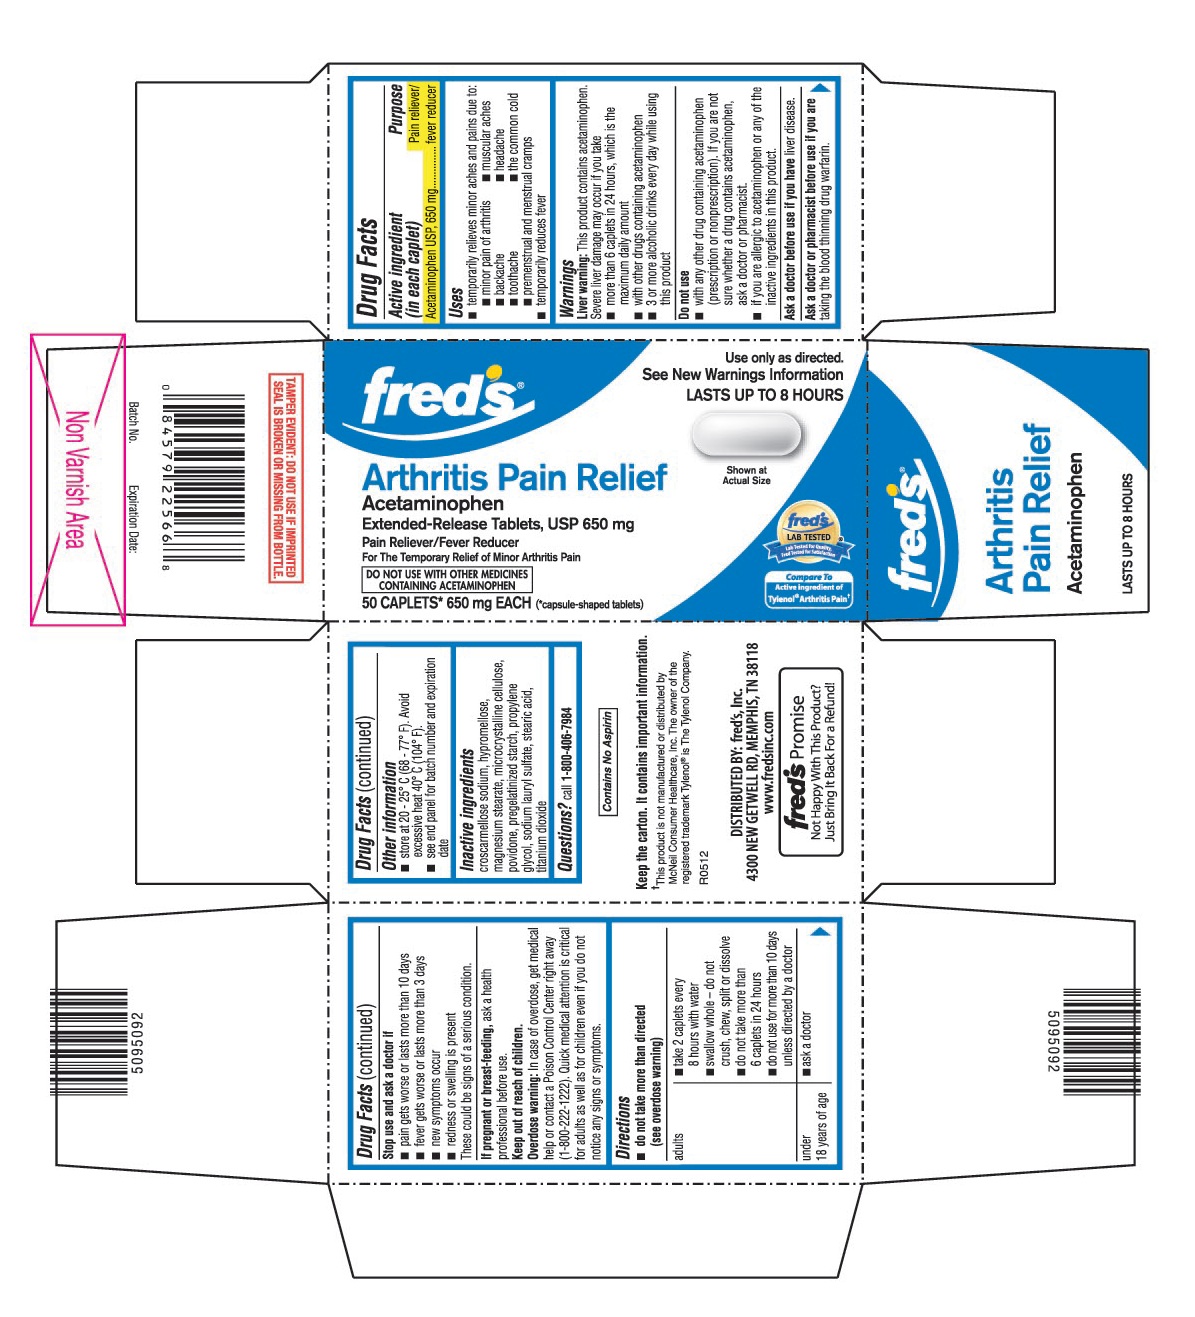 This is the 50 count bottle carton label for Fred's Acetaminophen extended-release tablets, USP 650 mg.